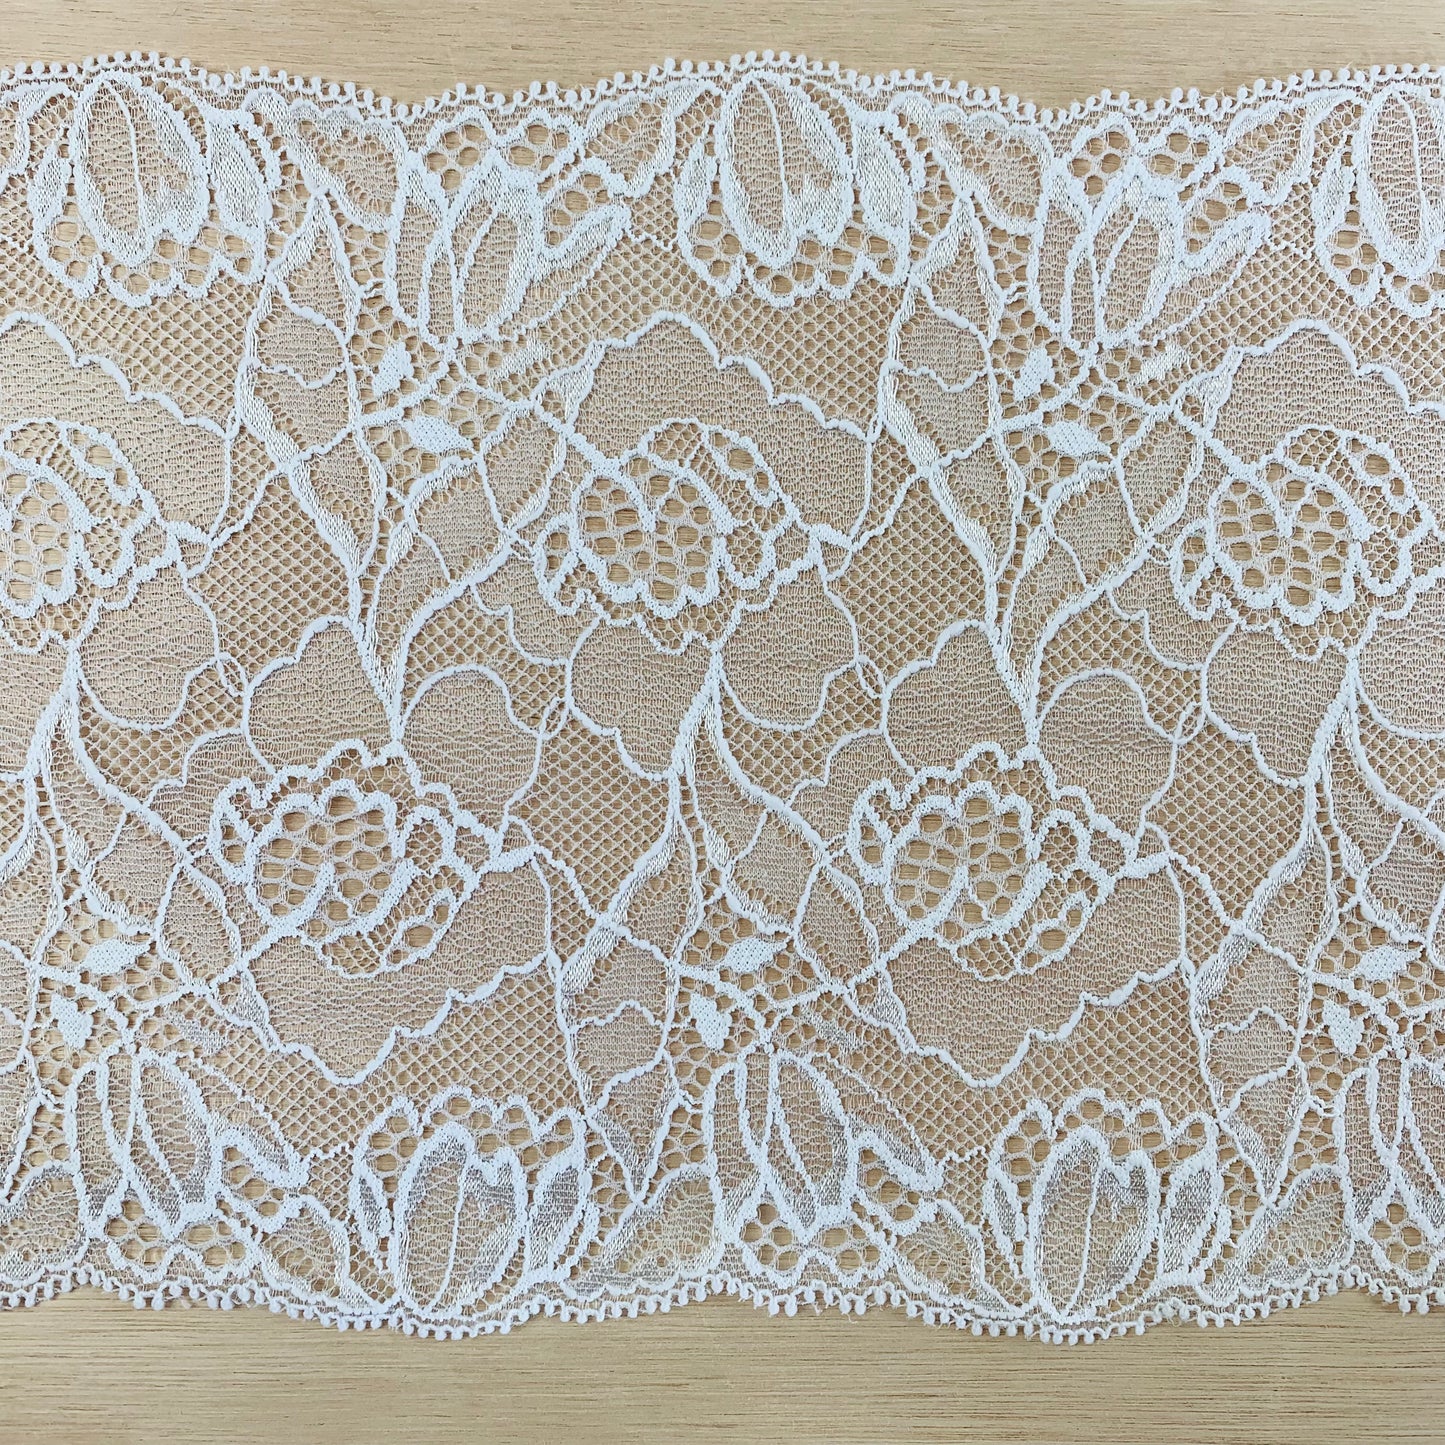 Sustainable Stretch Lace Galloon in hazel, perfect for DIY